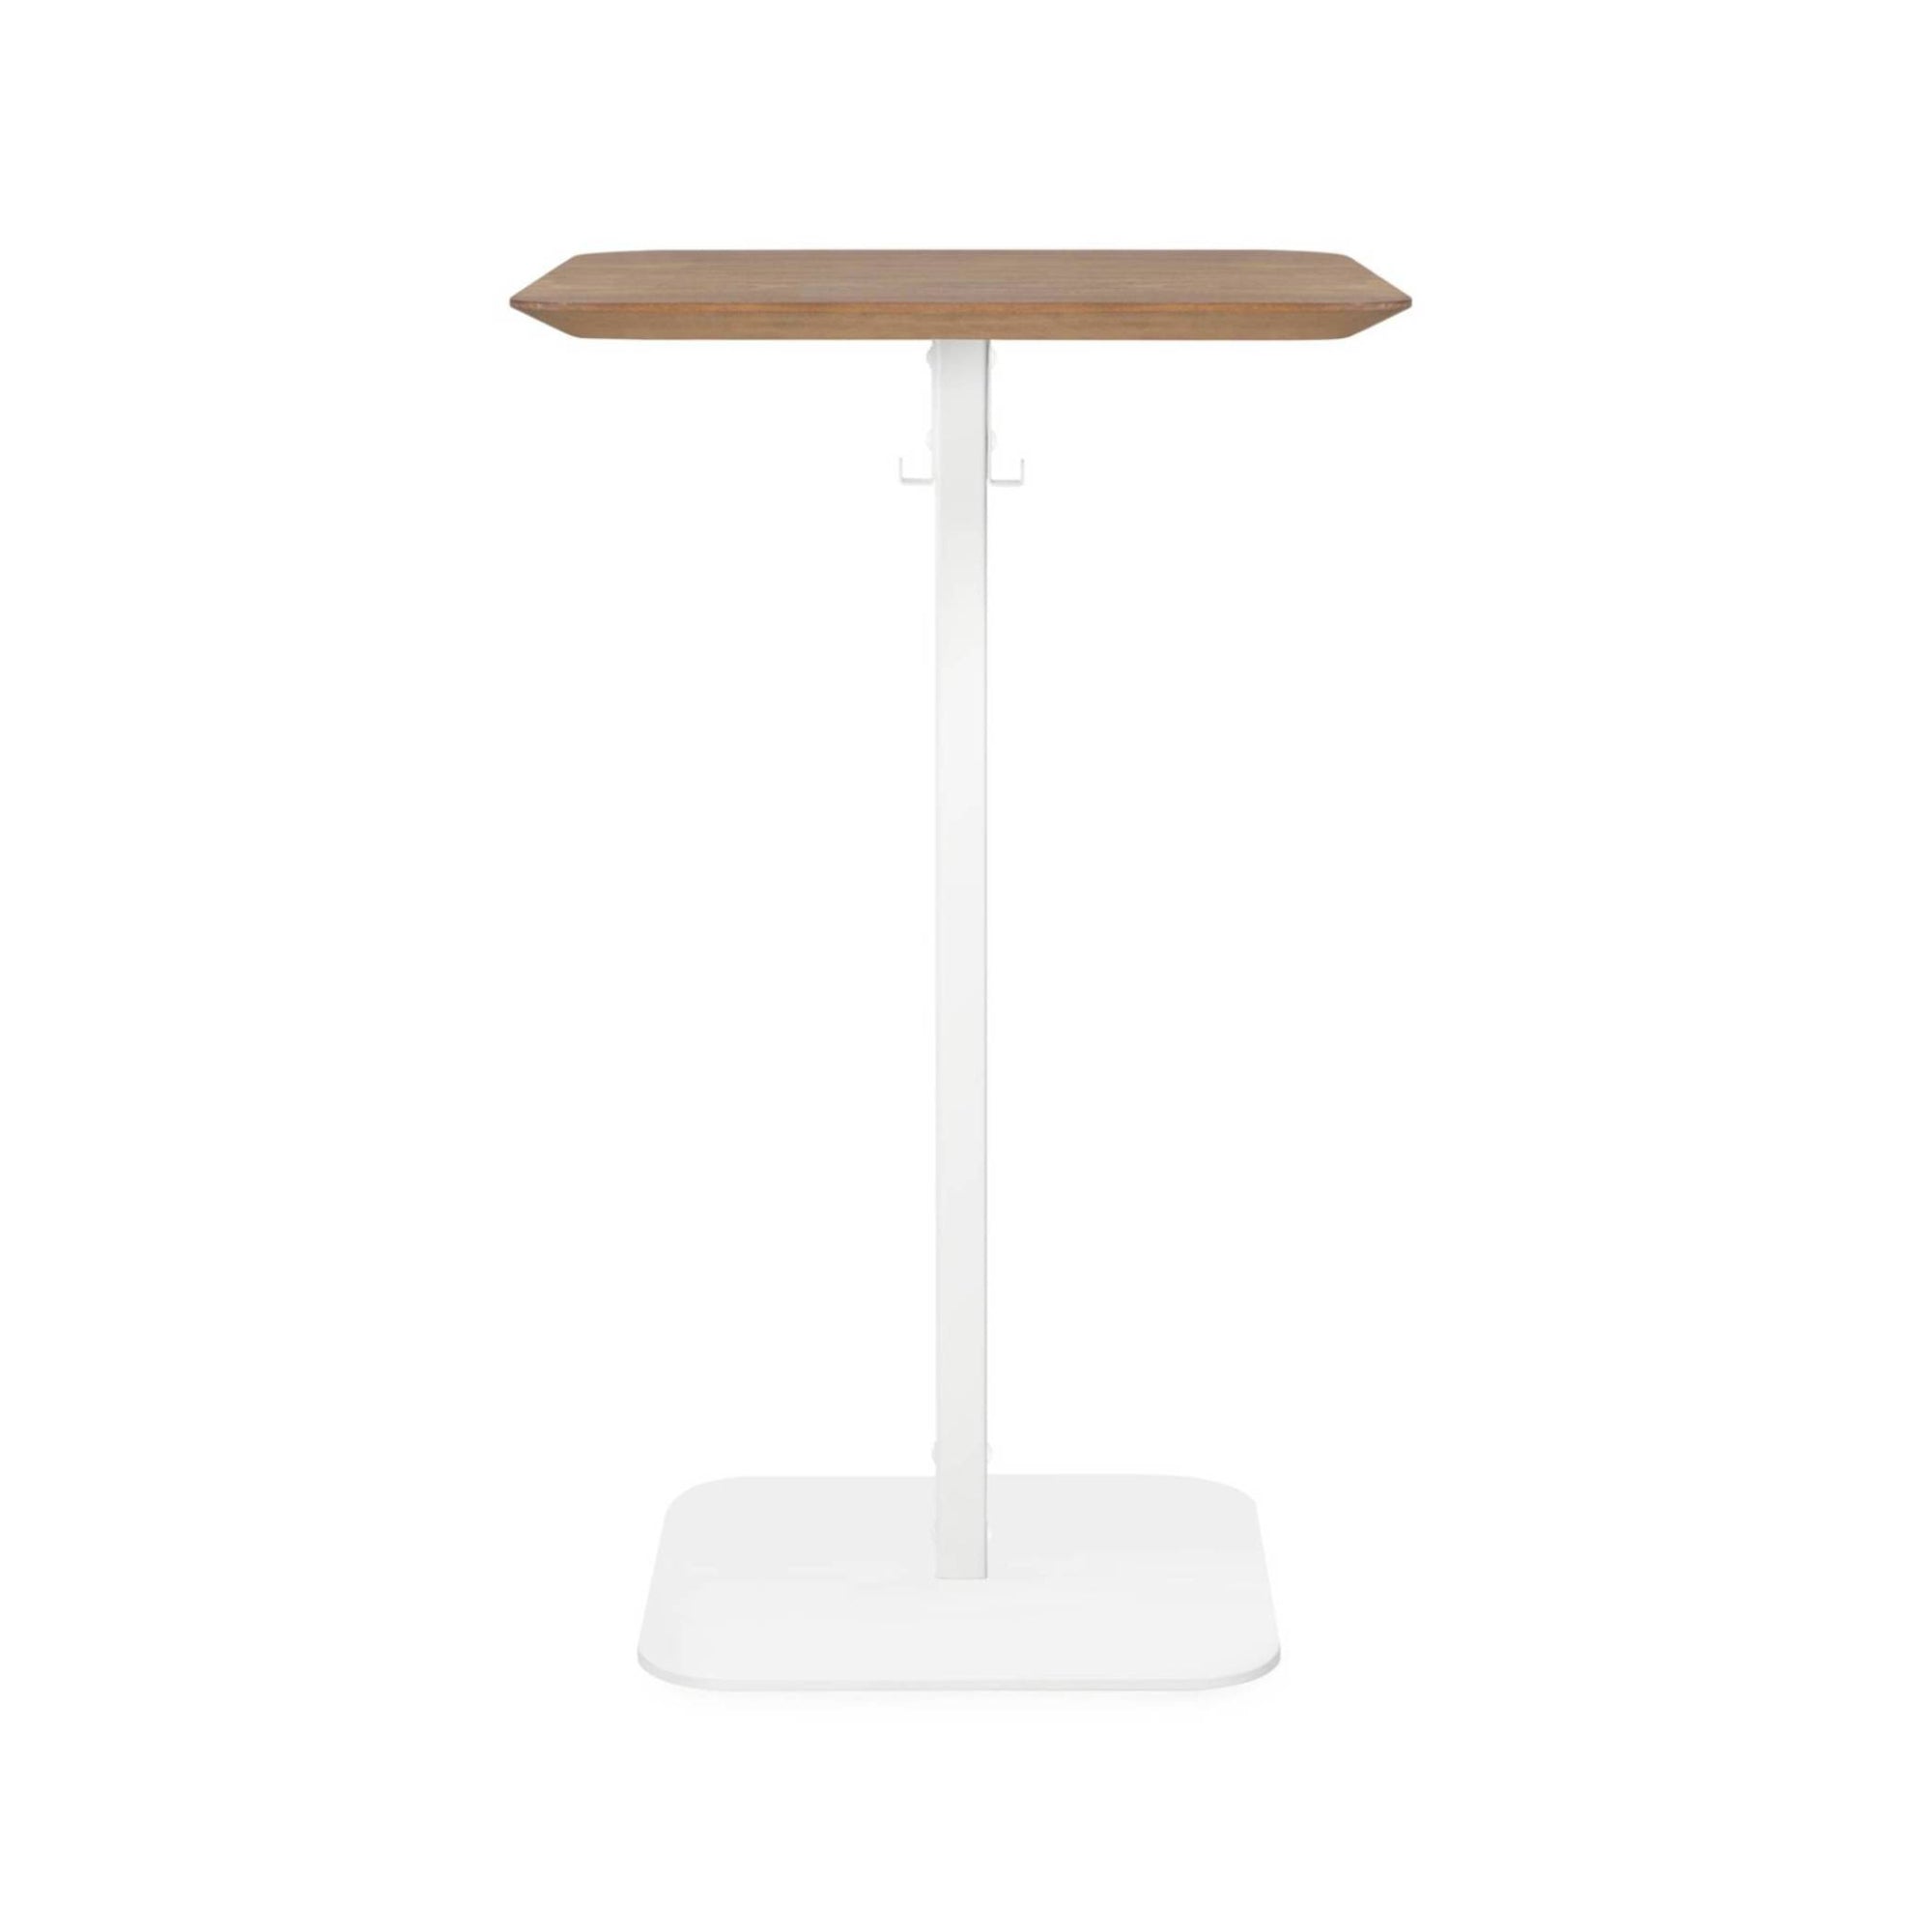 B-Around Square Table: Large + Tall + White